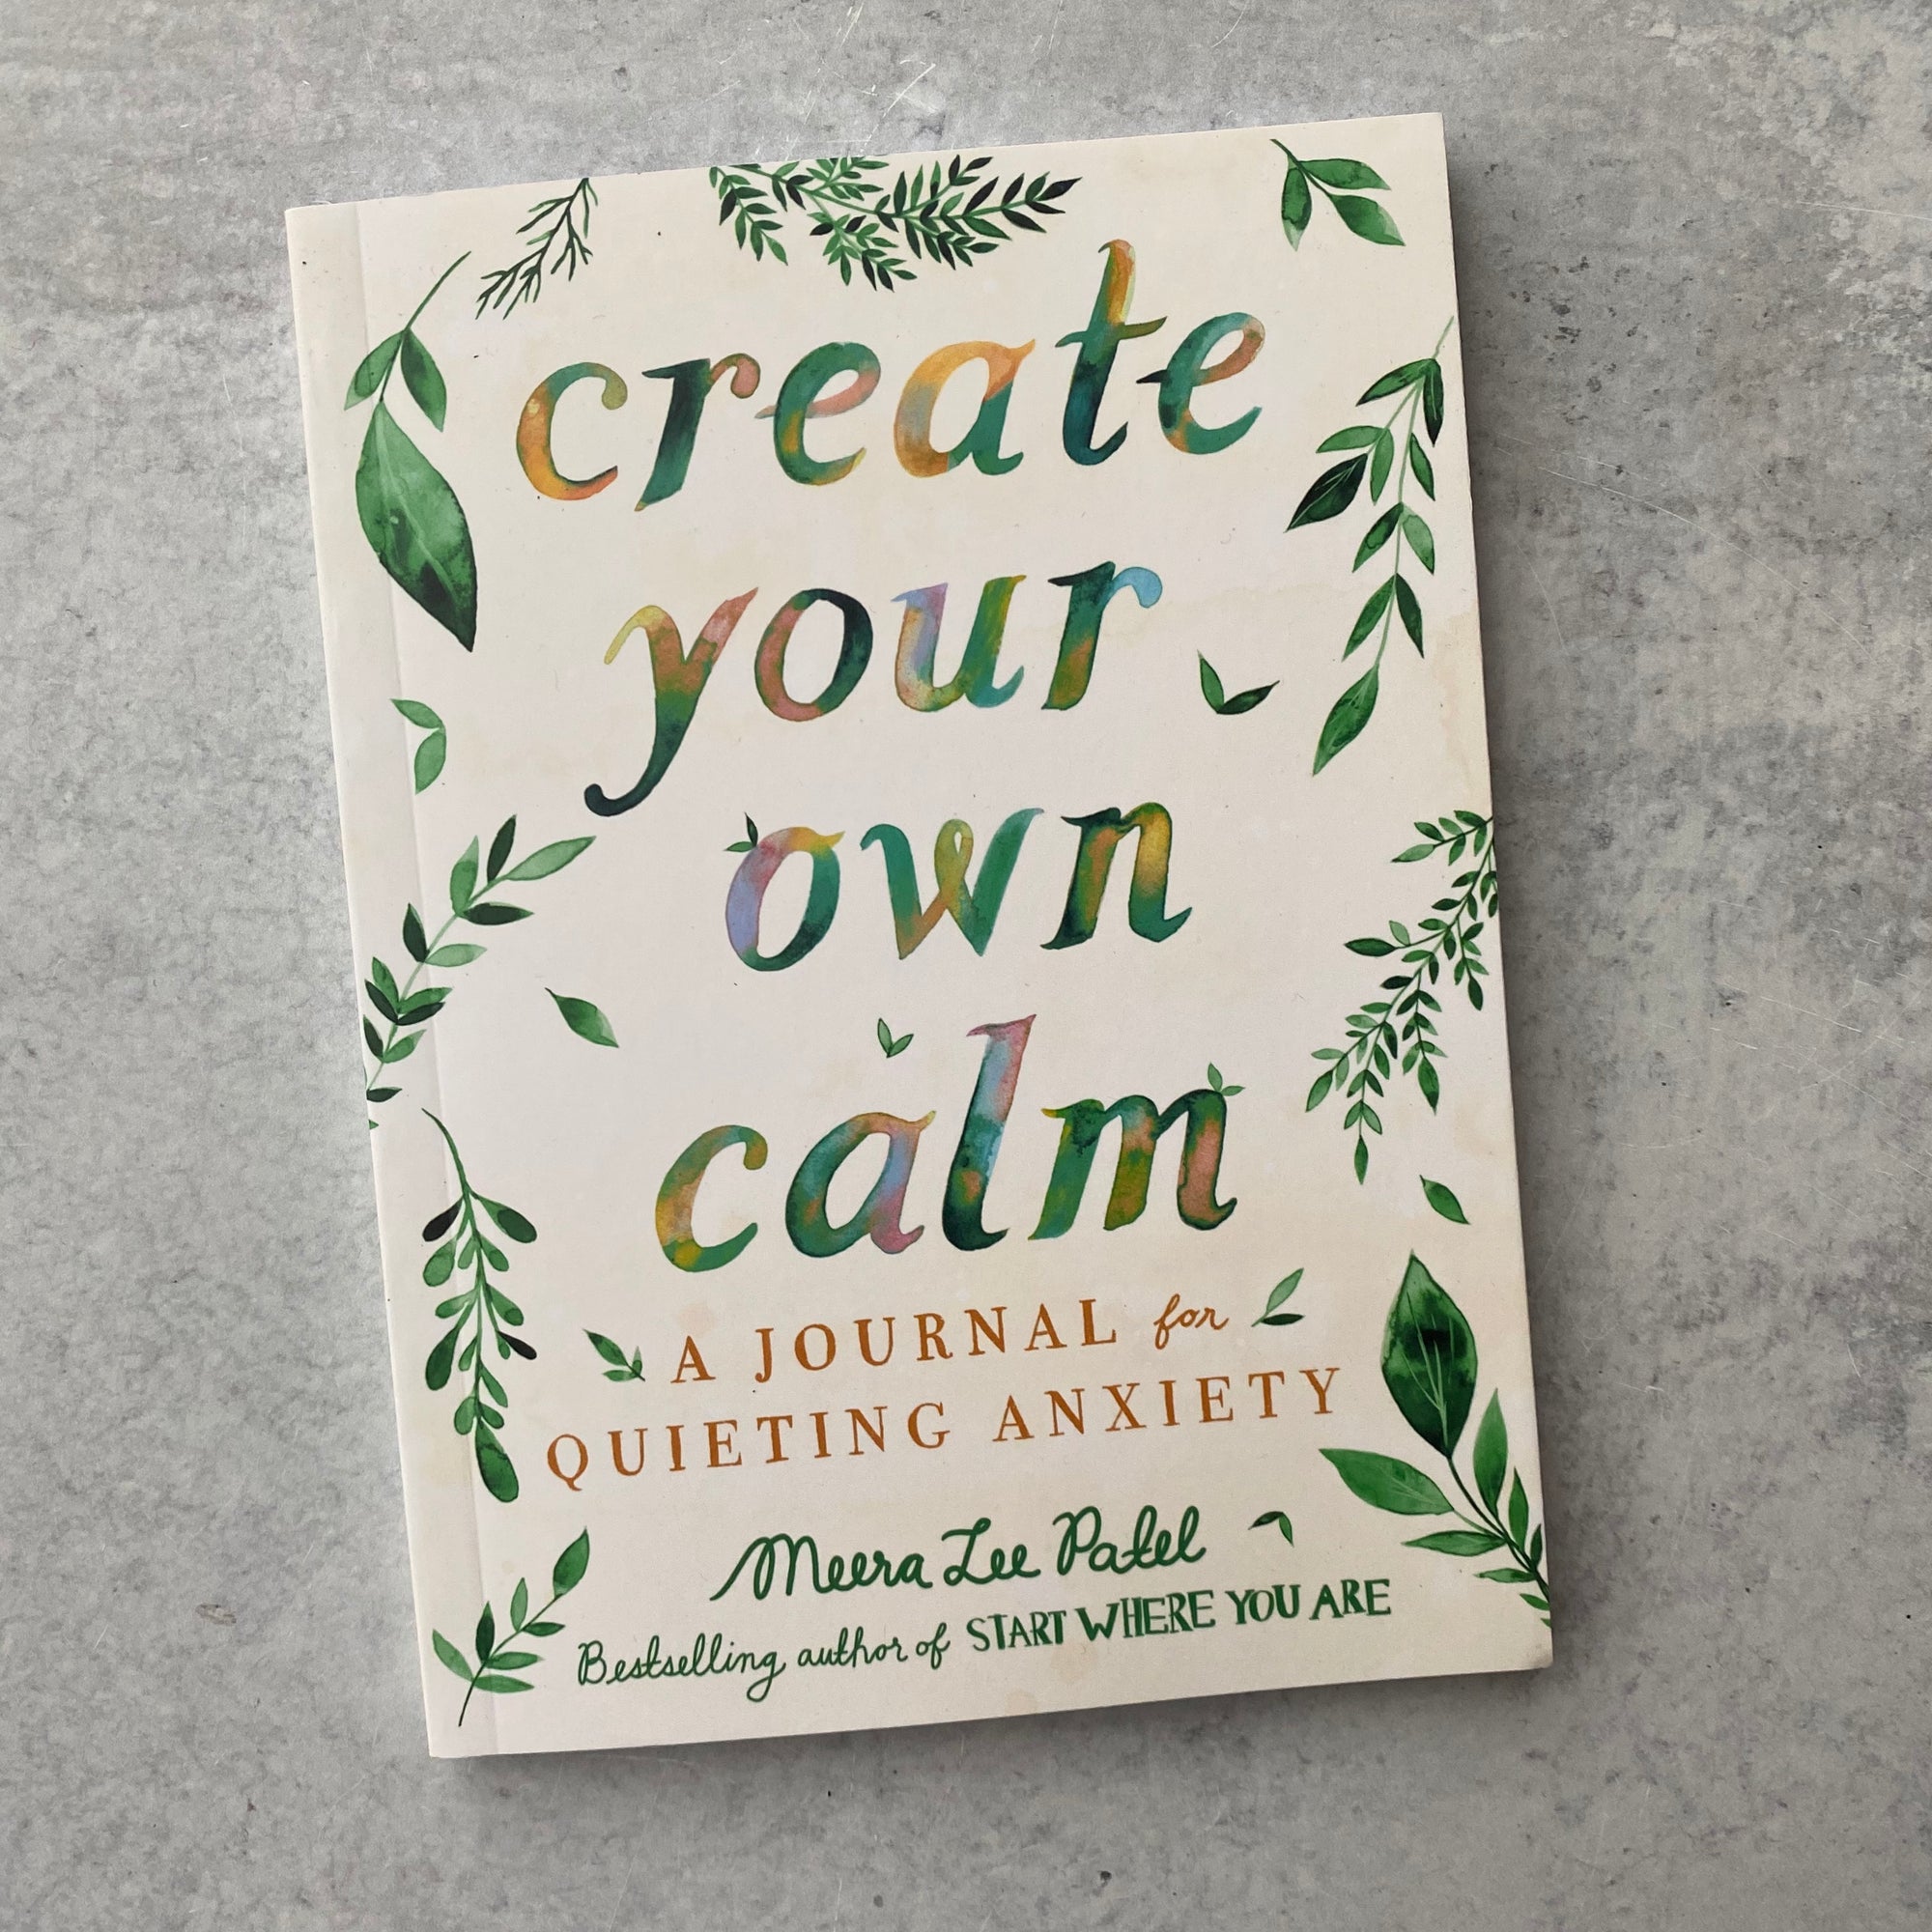 Create Your Own Calm (sign up for in stock alert)